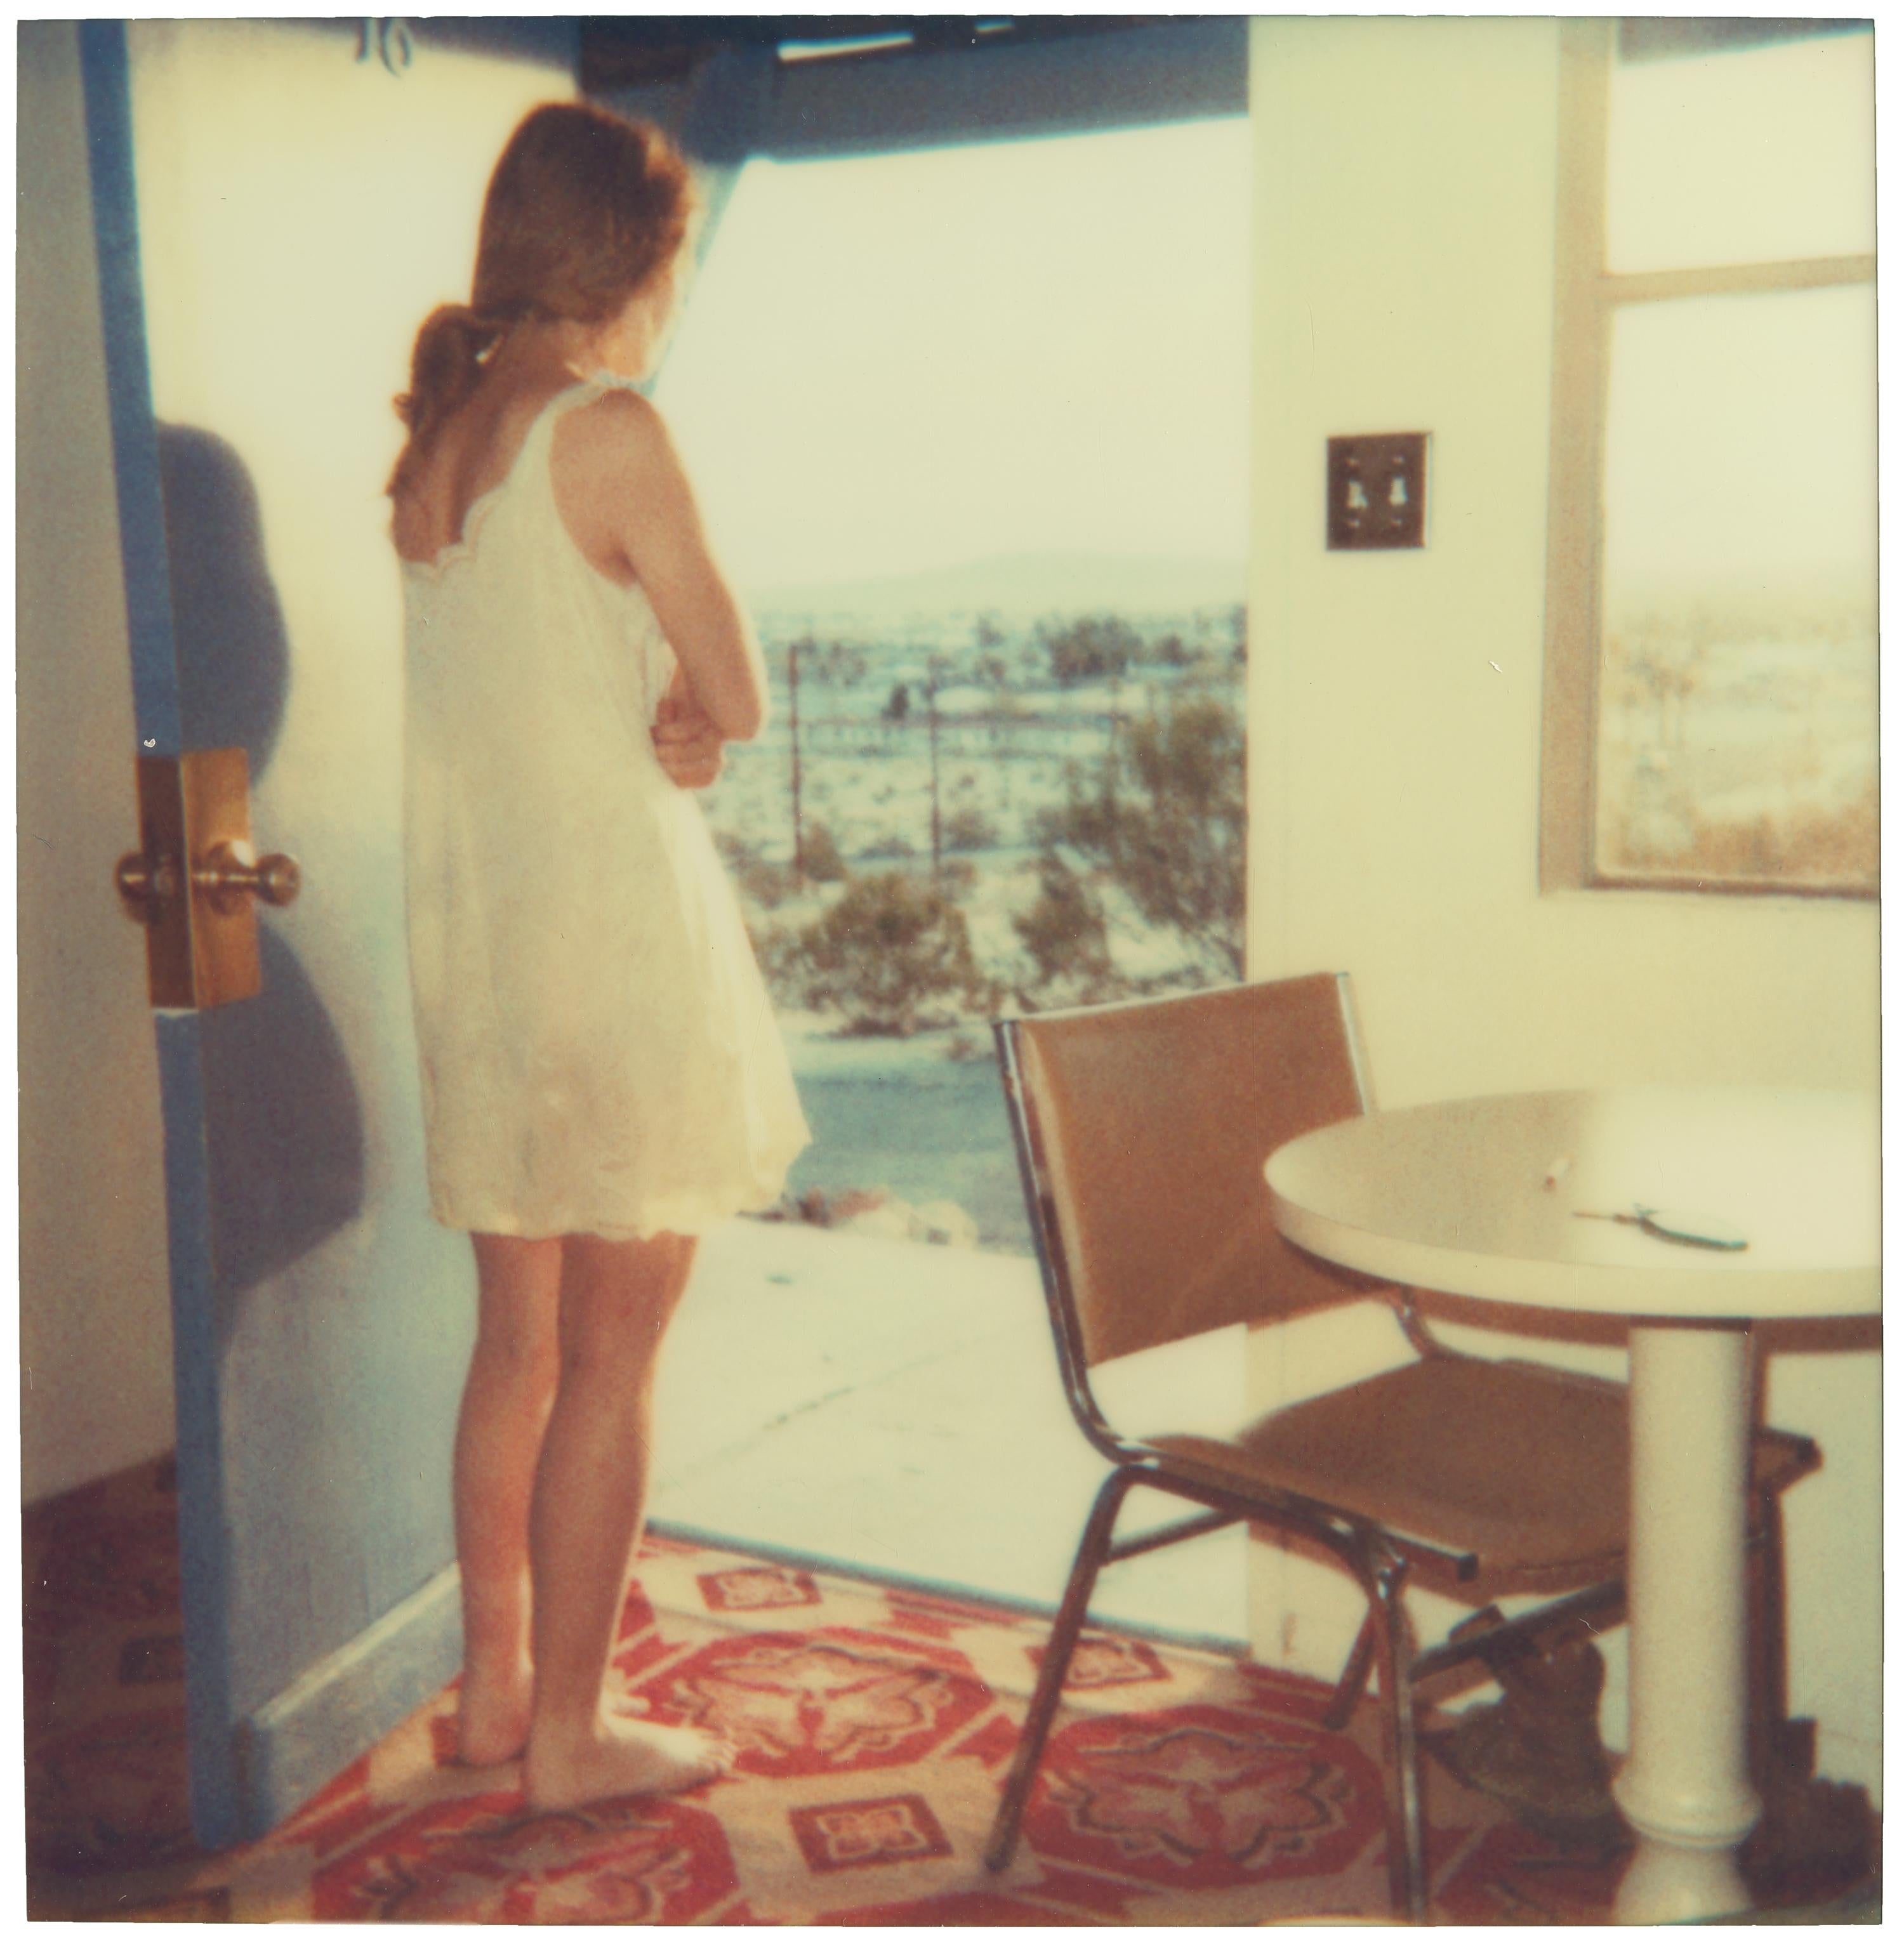 Hillview Motel (Last Picture Show) - analog, vintage, based on 3 Polaroids - Brown Color Photograph by Stefanie Schneider